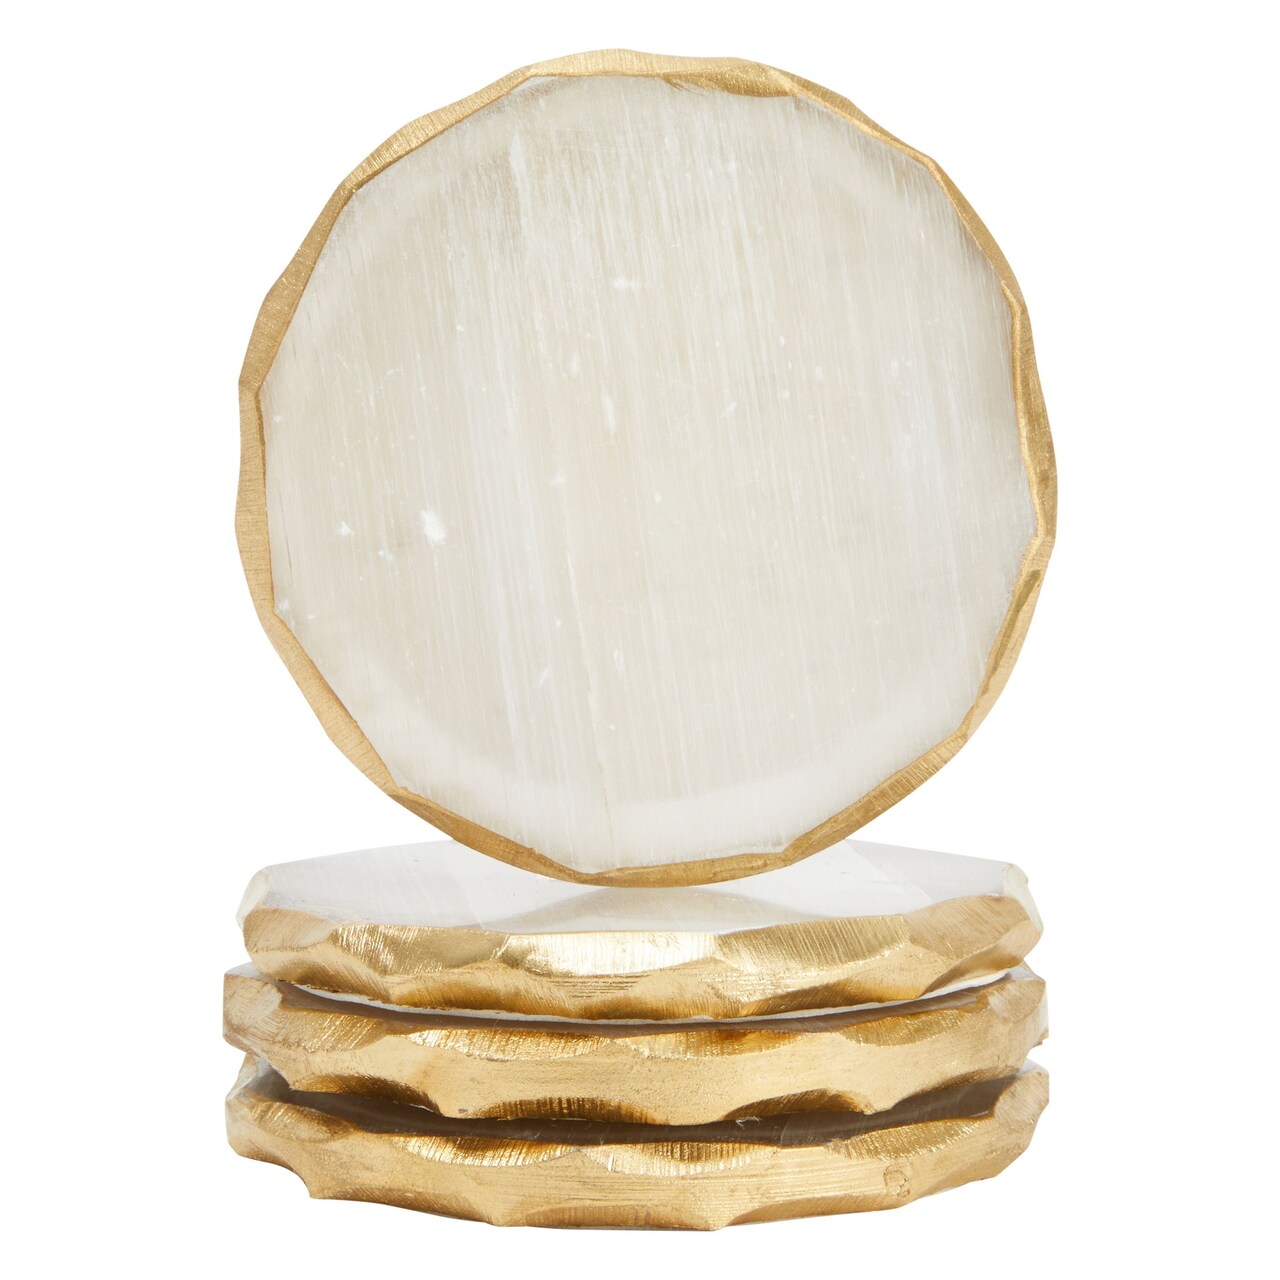 4 Pack Natural Selenite Crystal Coasters for Drinks, Geode Slices with Gold Painted Edge (3.75-4 In)